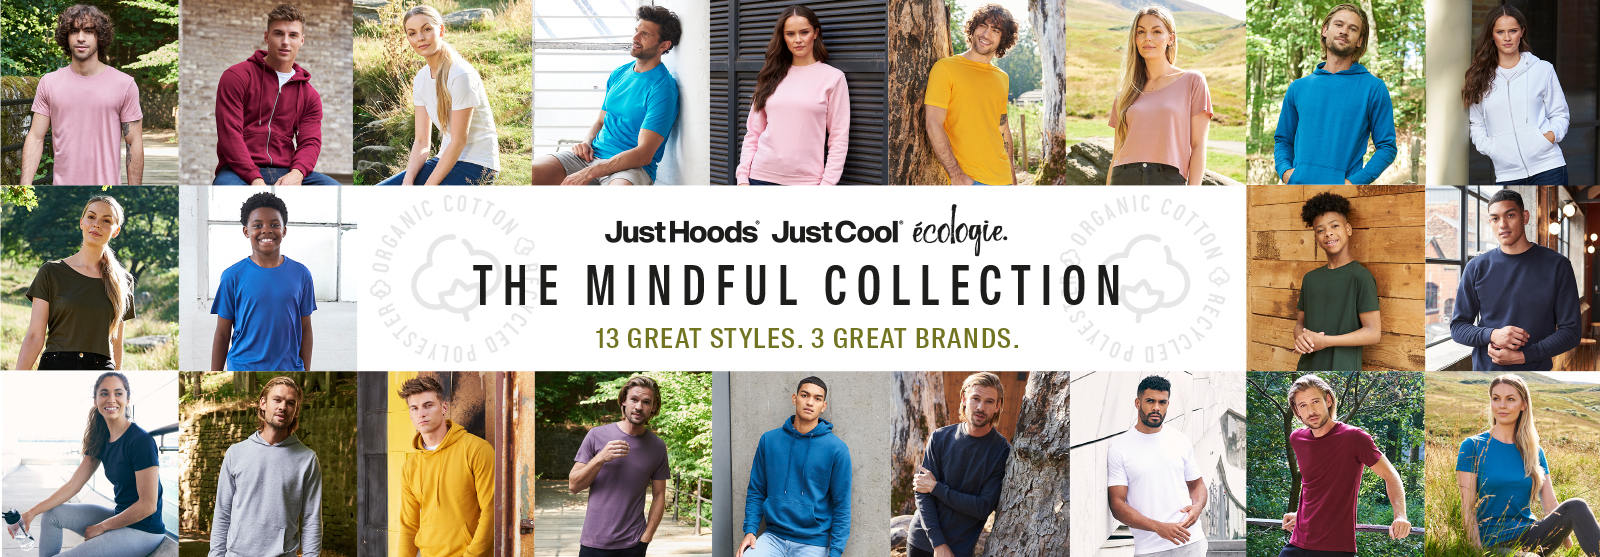 AWDis_Mindful_Collection